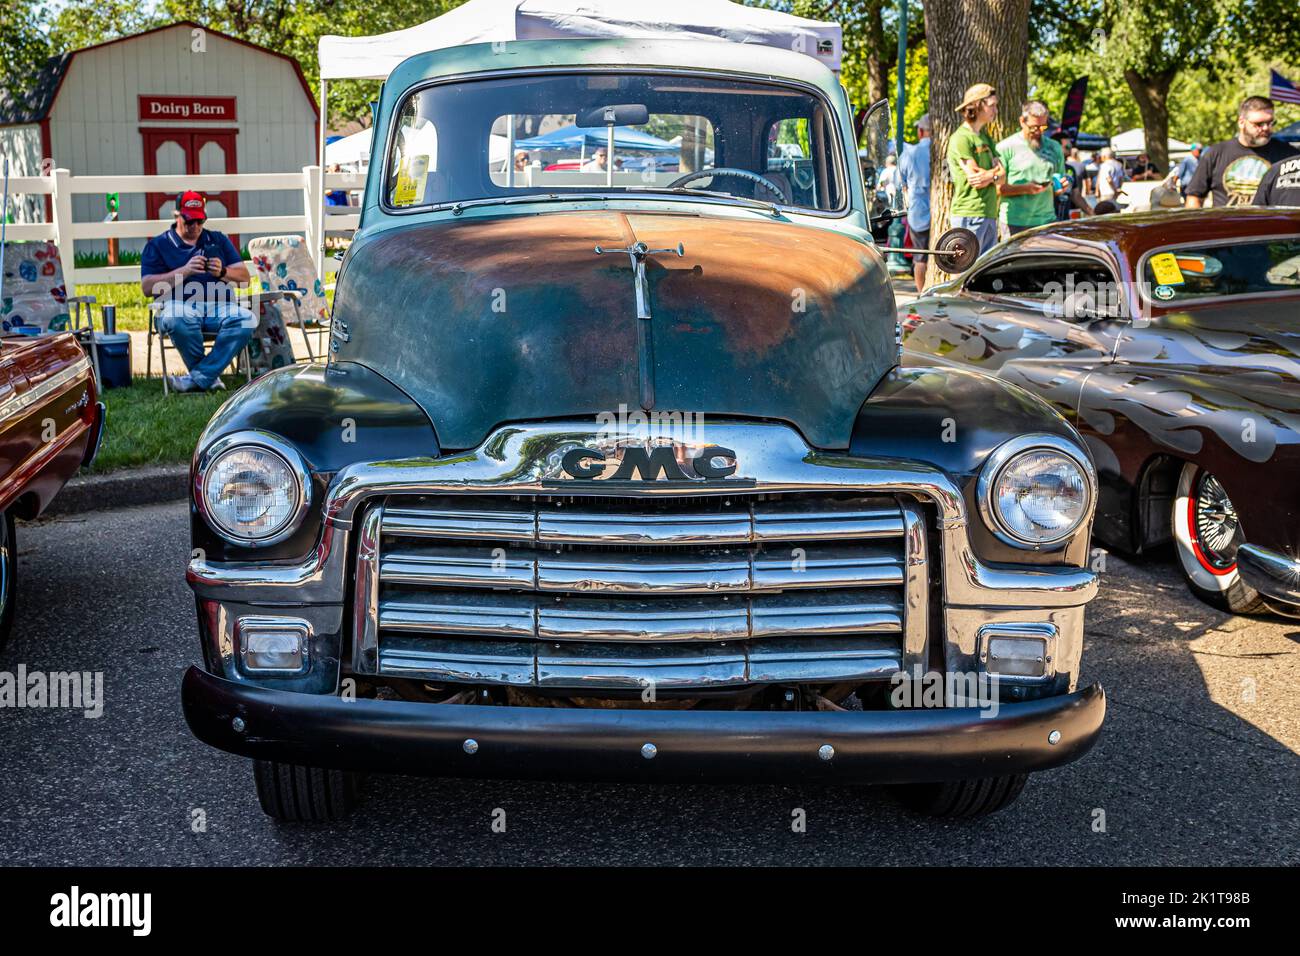 Falcon Heights, MN - June 18, 2022: High perspective front view of a 1954 GMC 100 Stepside Pickup Truck at a local car show. Stock Photo